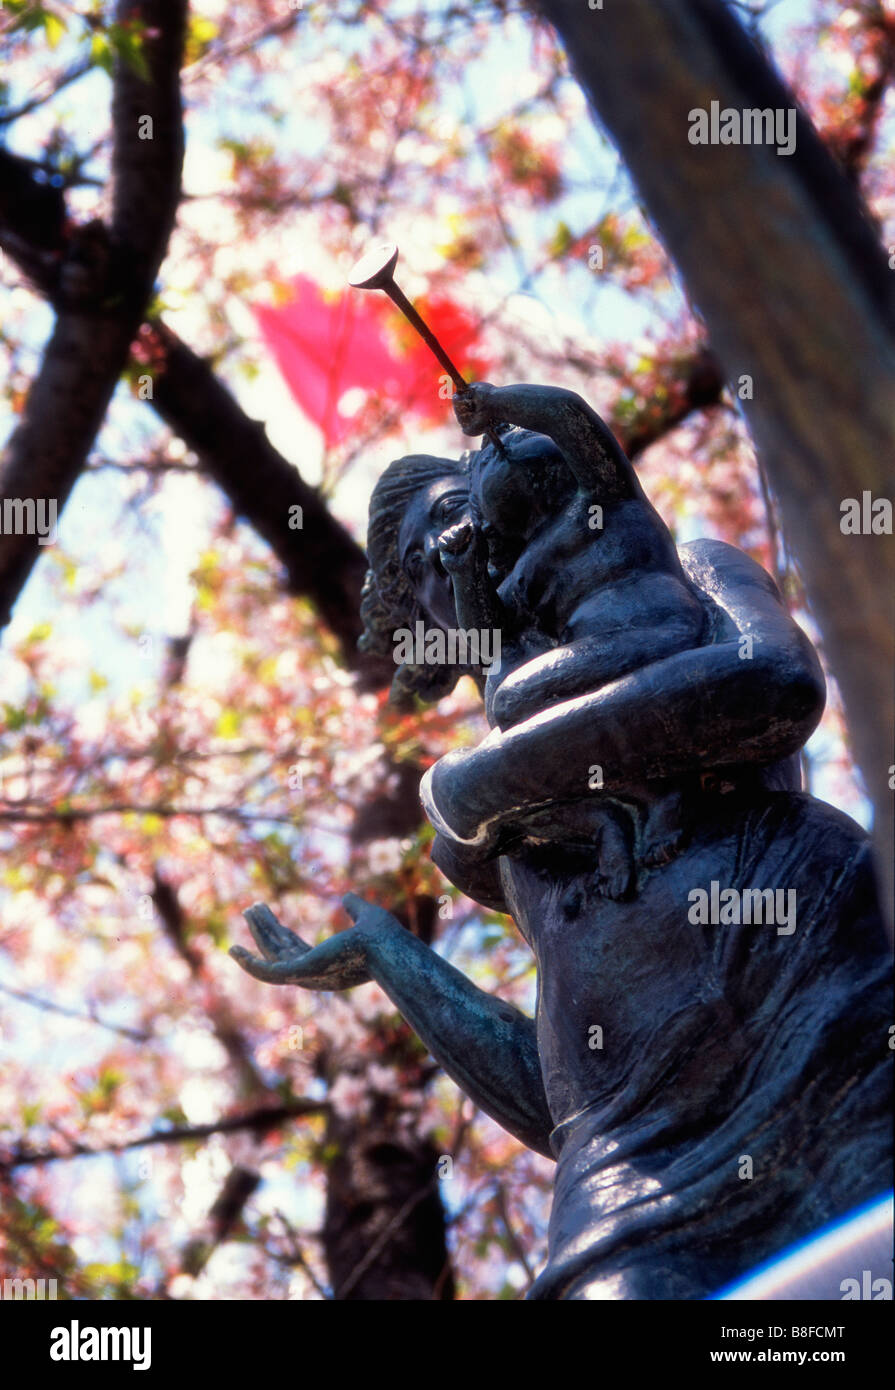 The Statue of a Prayer for Peace, which is located in the Hiroshima Peace Memorial Park in Hiroshima, Japan. Stock Photo